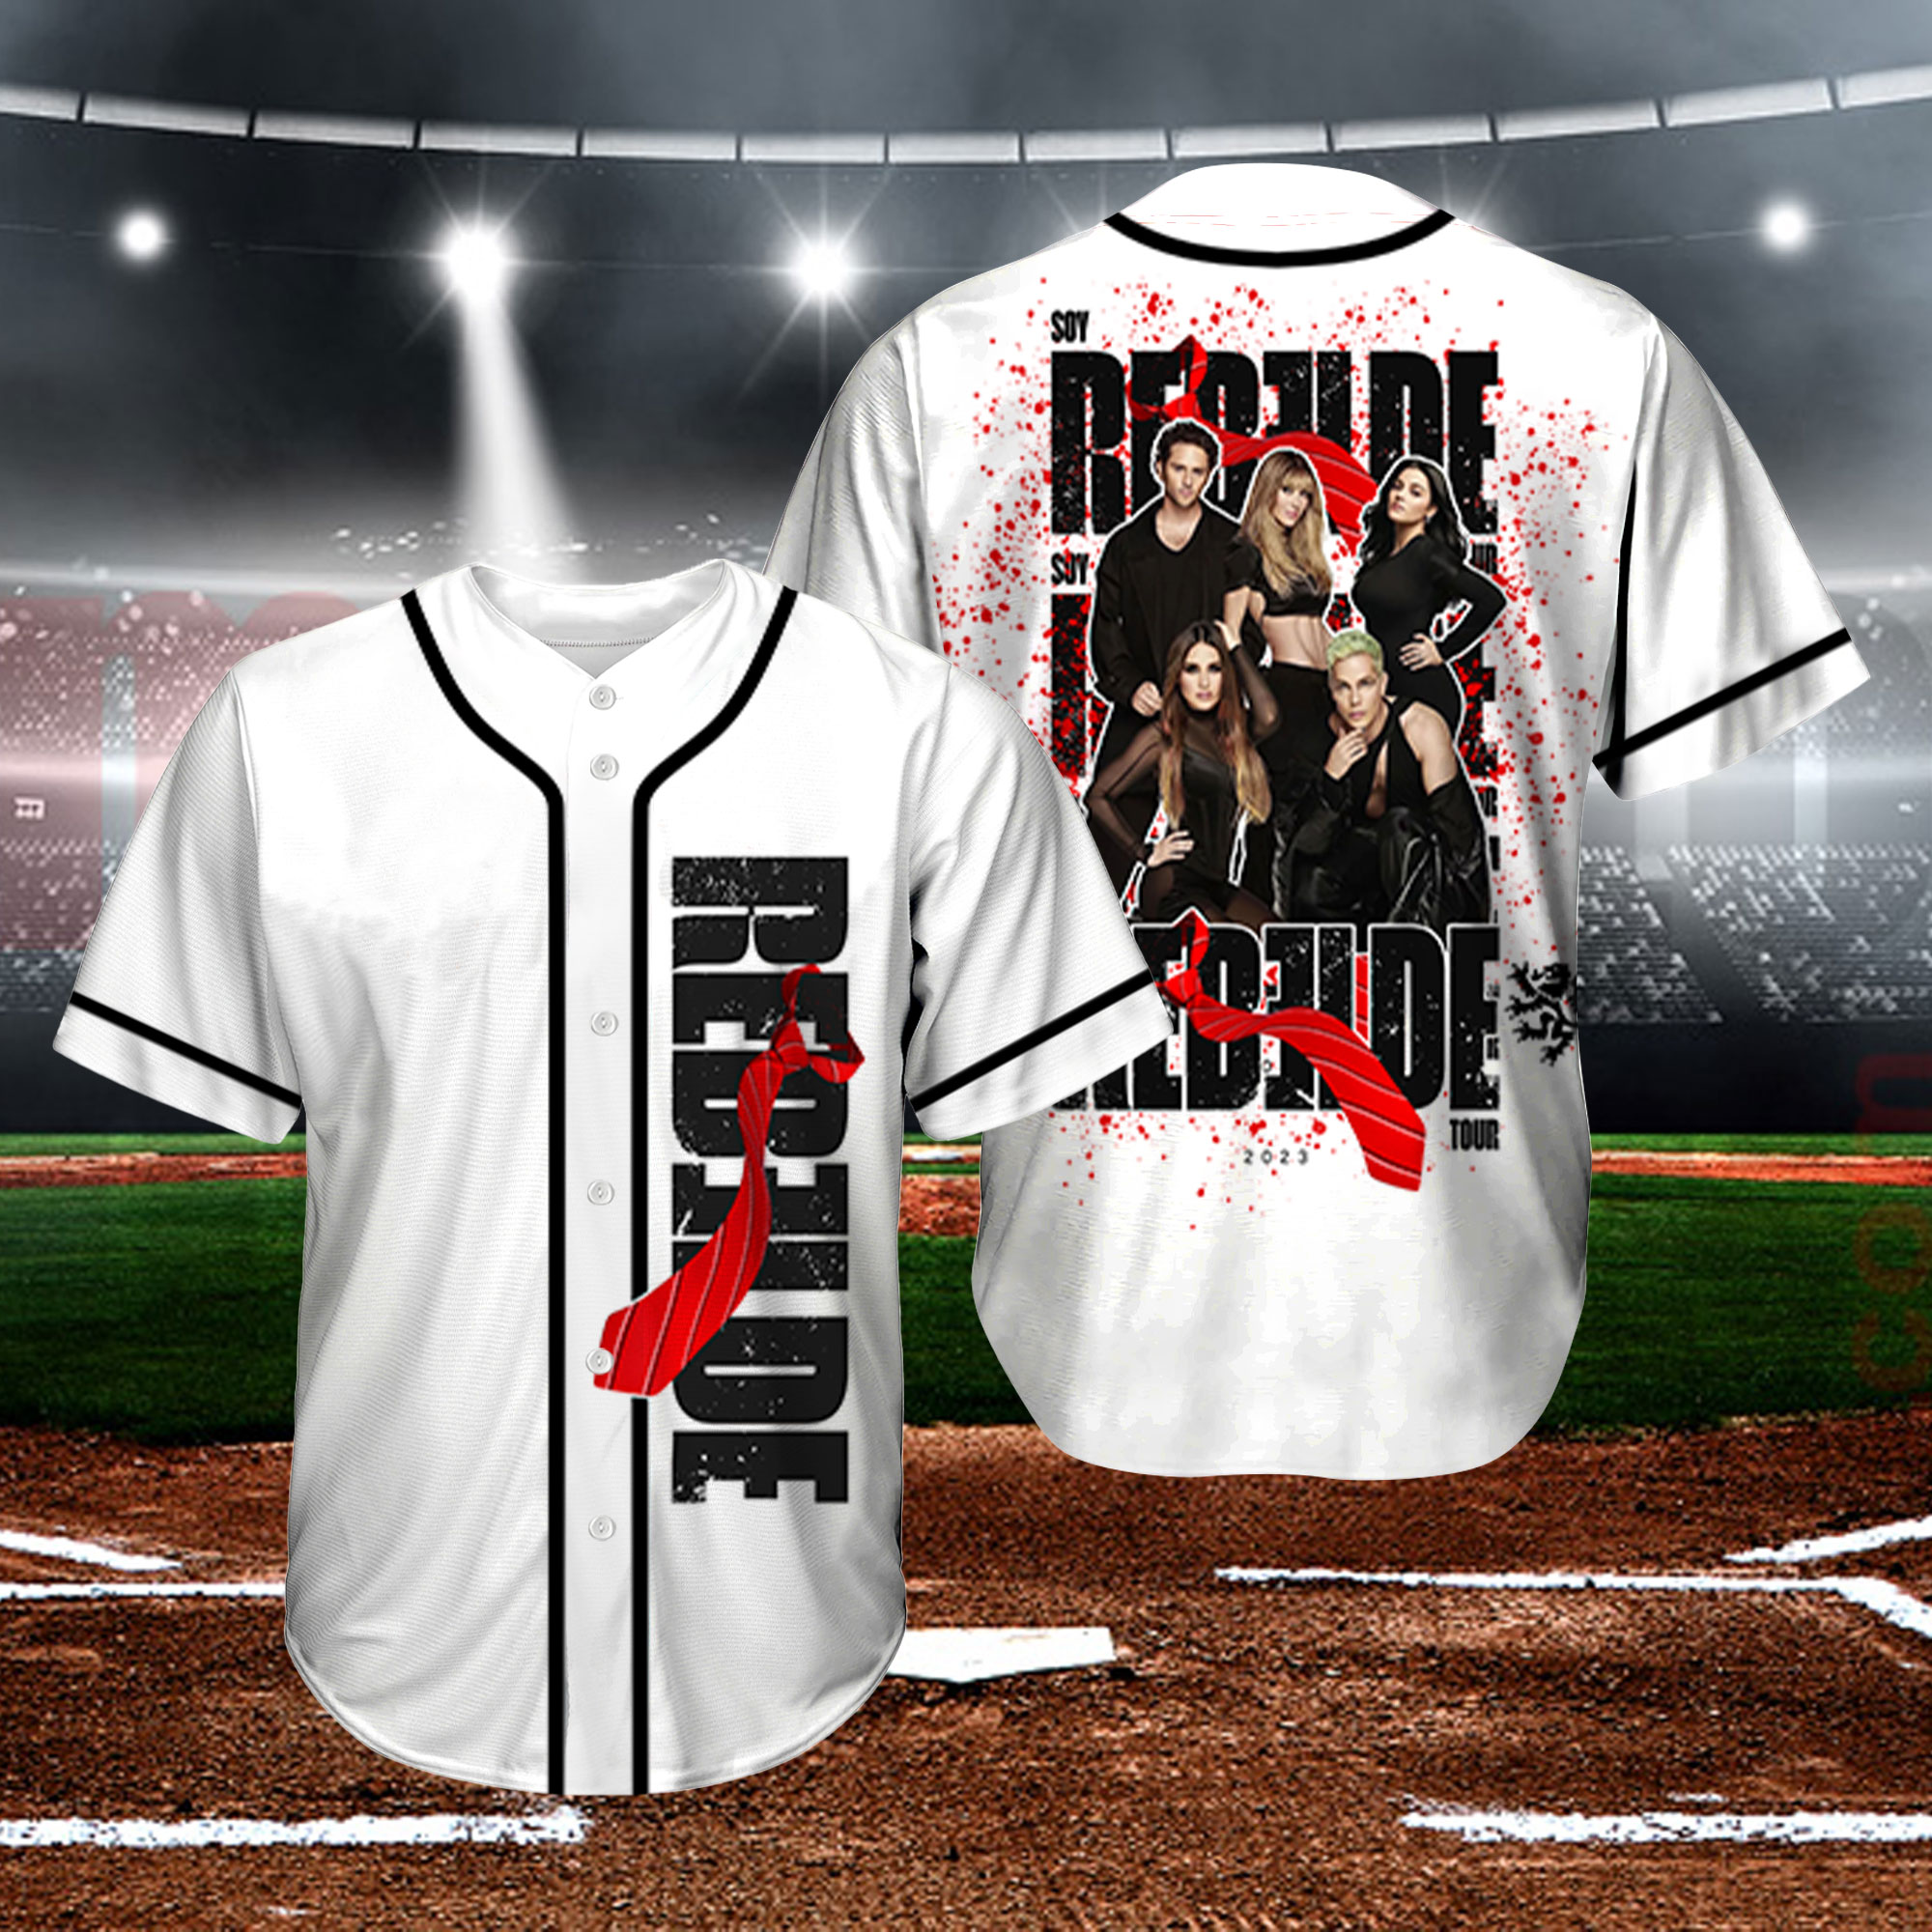 sublimated baseball jersey designs